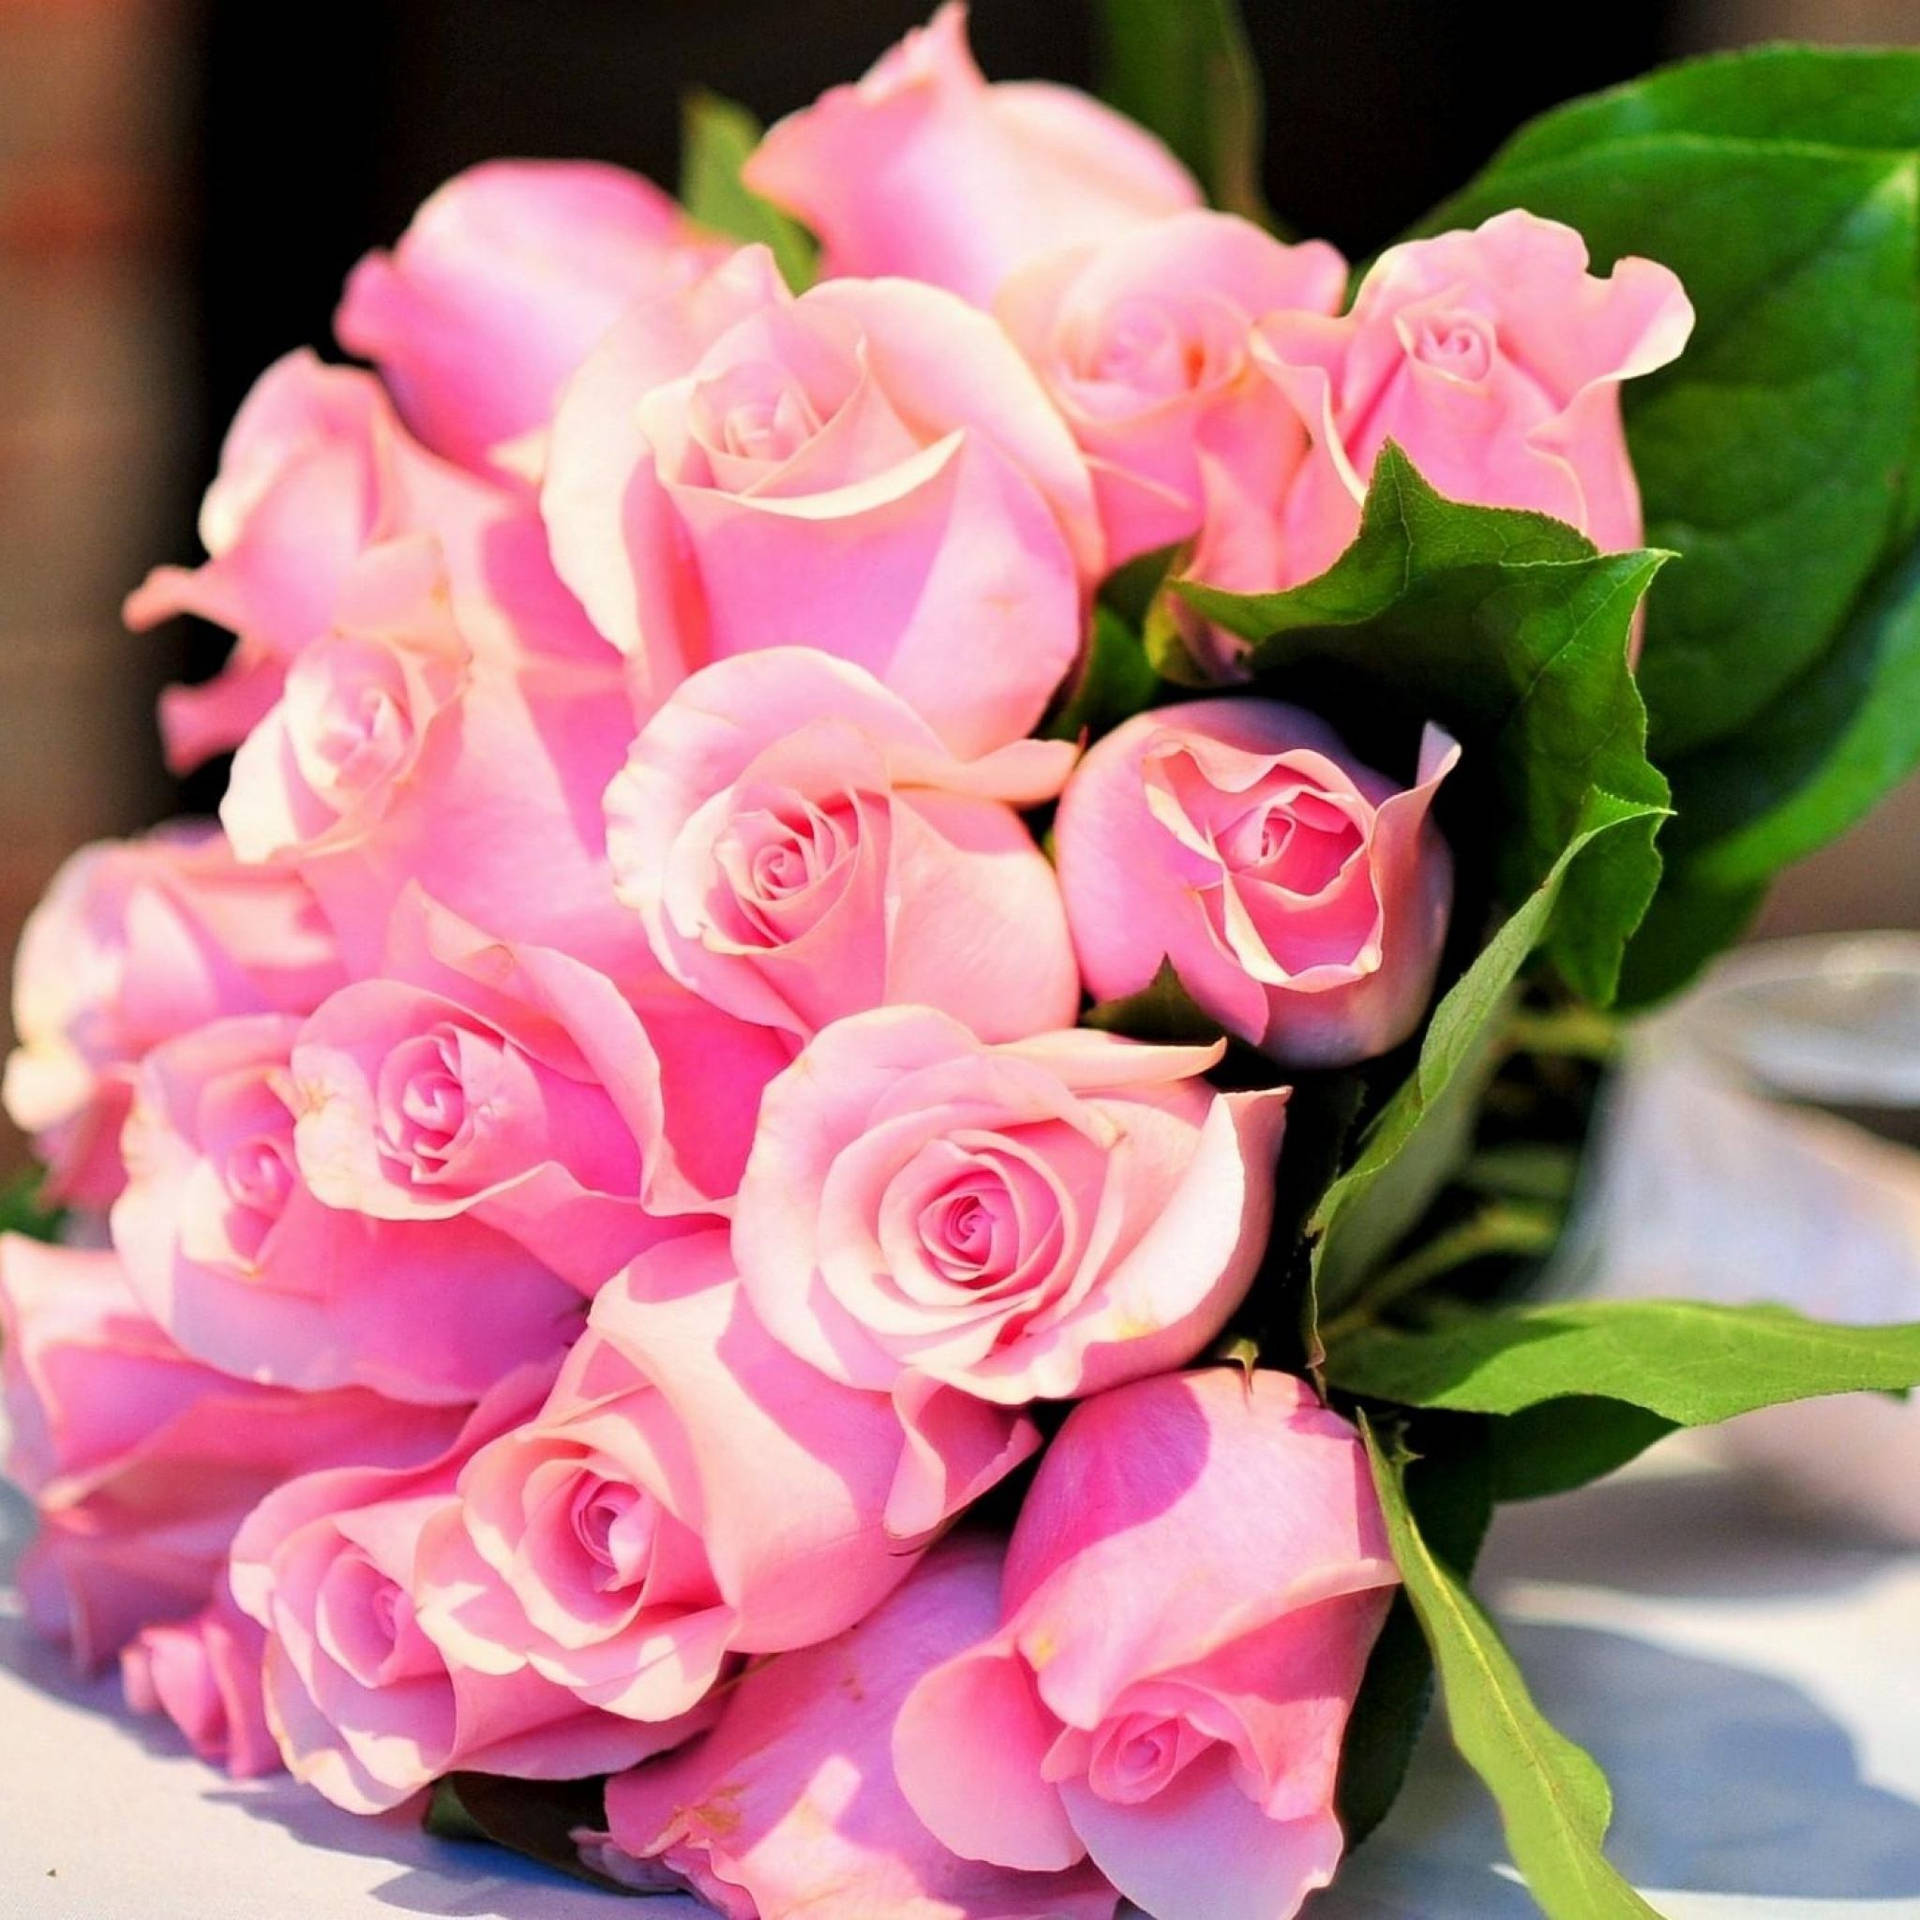 Cute Pink Flower Bouquet Of Roses Background